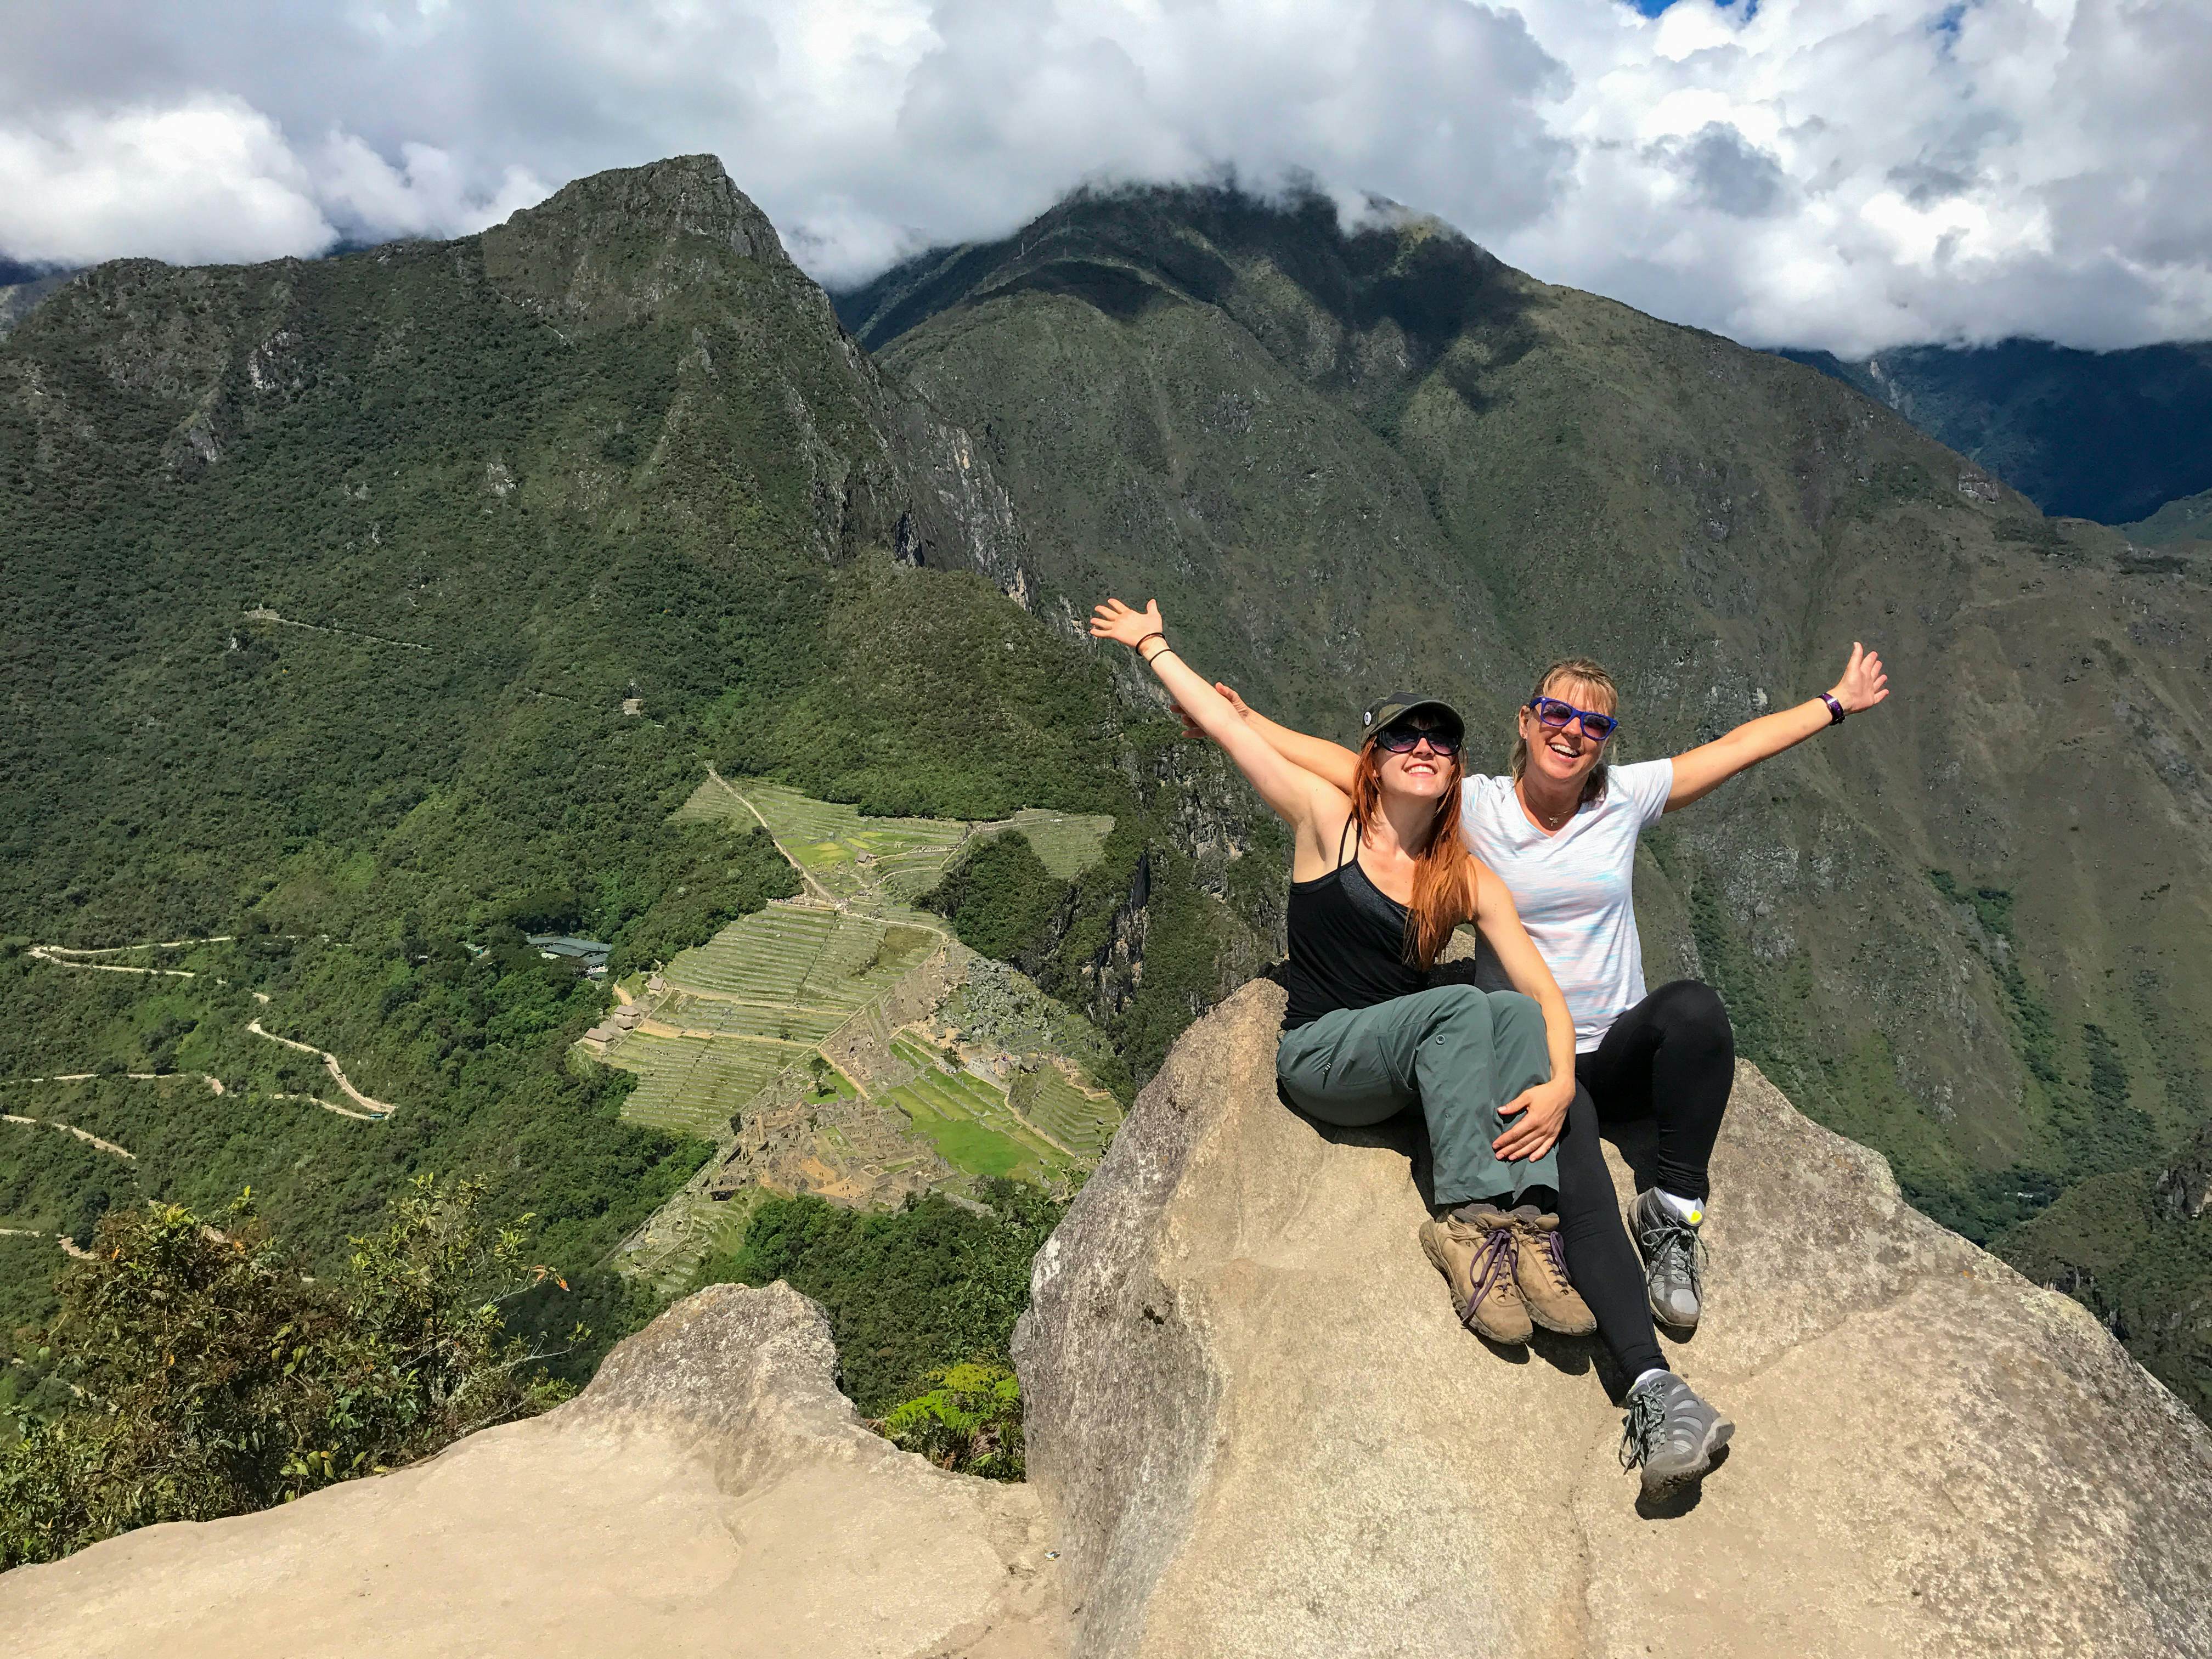 Inca Trail – Travel guide at Wikivoyage